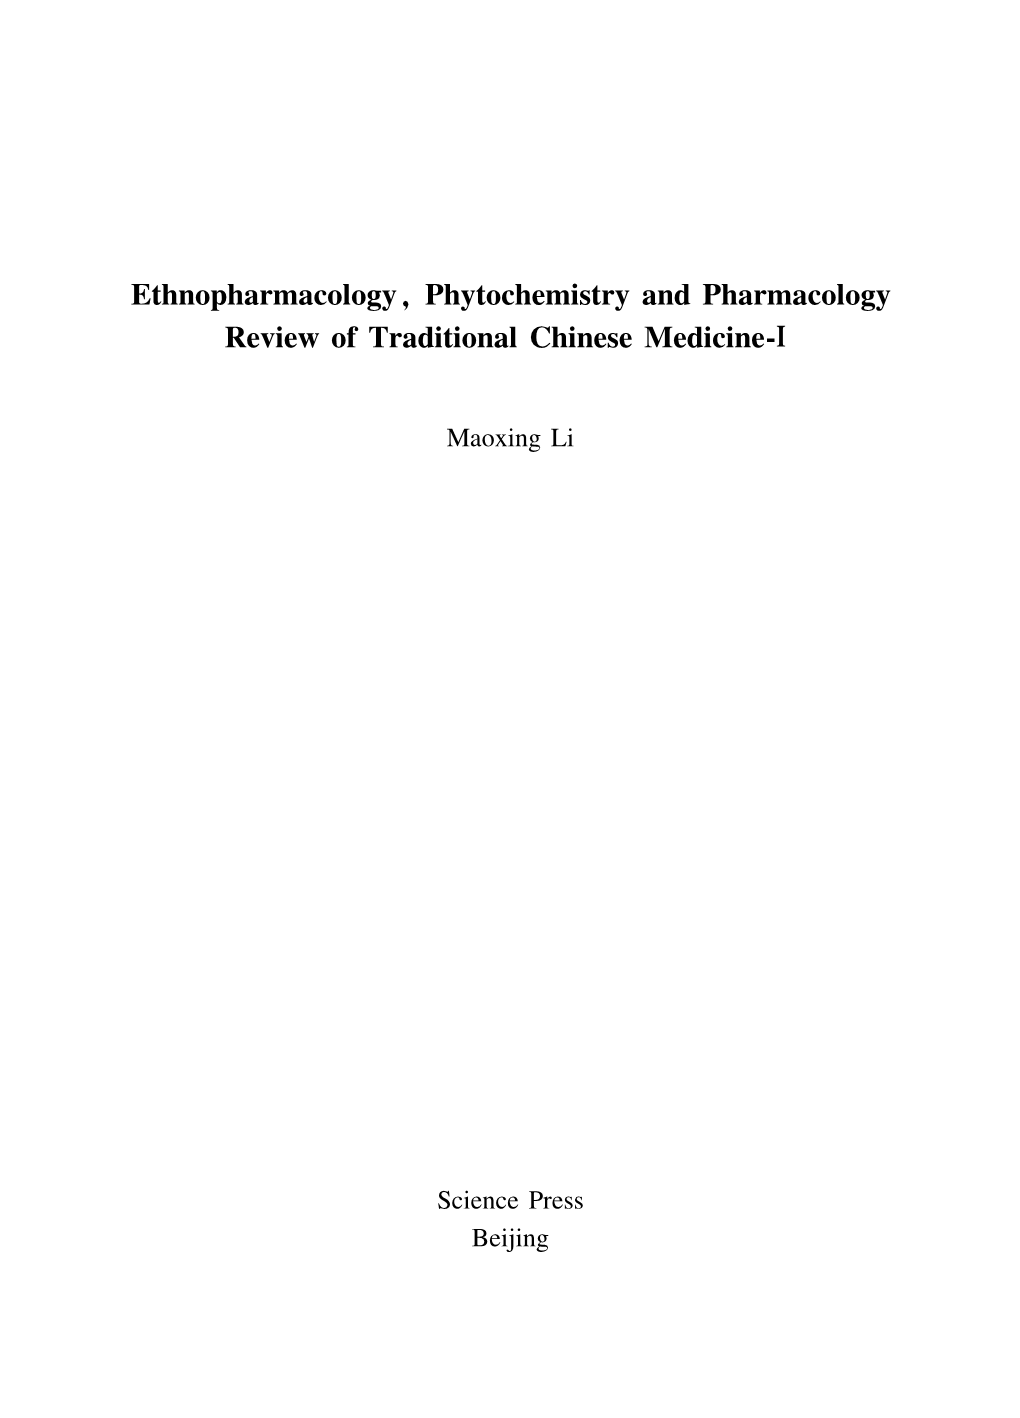 Ethnopharmacology, Phytochemistry and Pharmacology Review of Traditional Chinese Medicine-Ⅰ